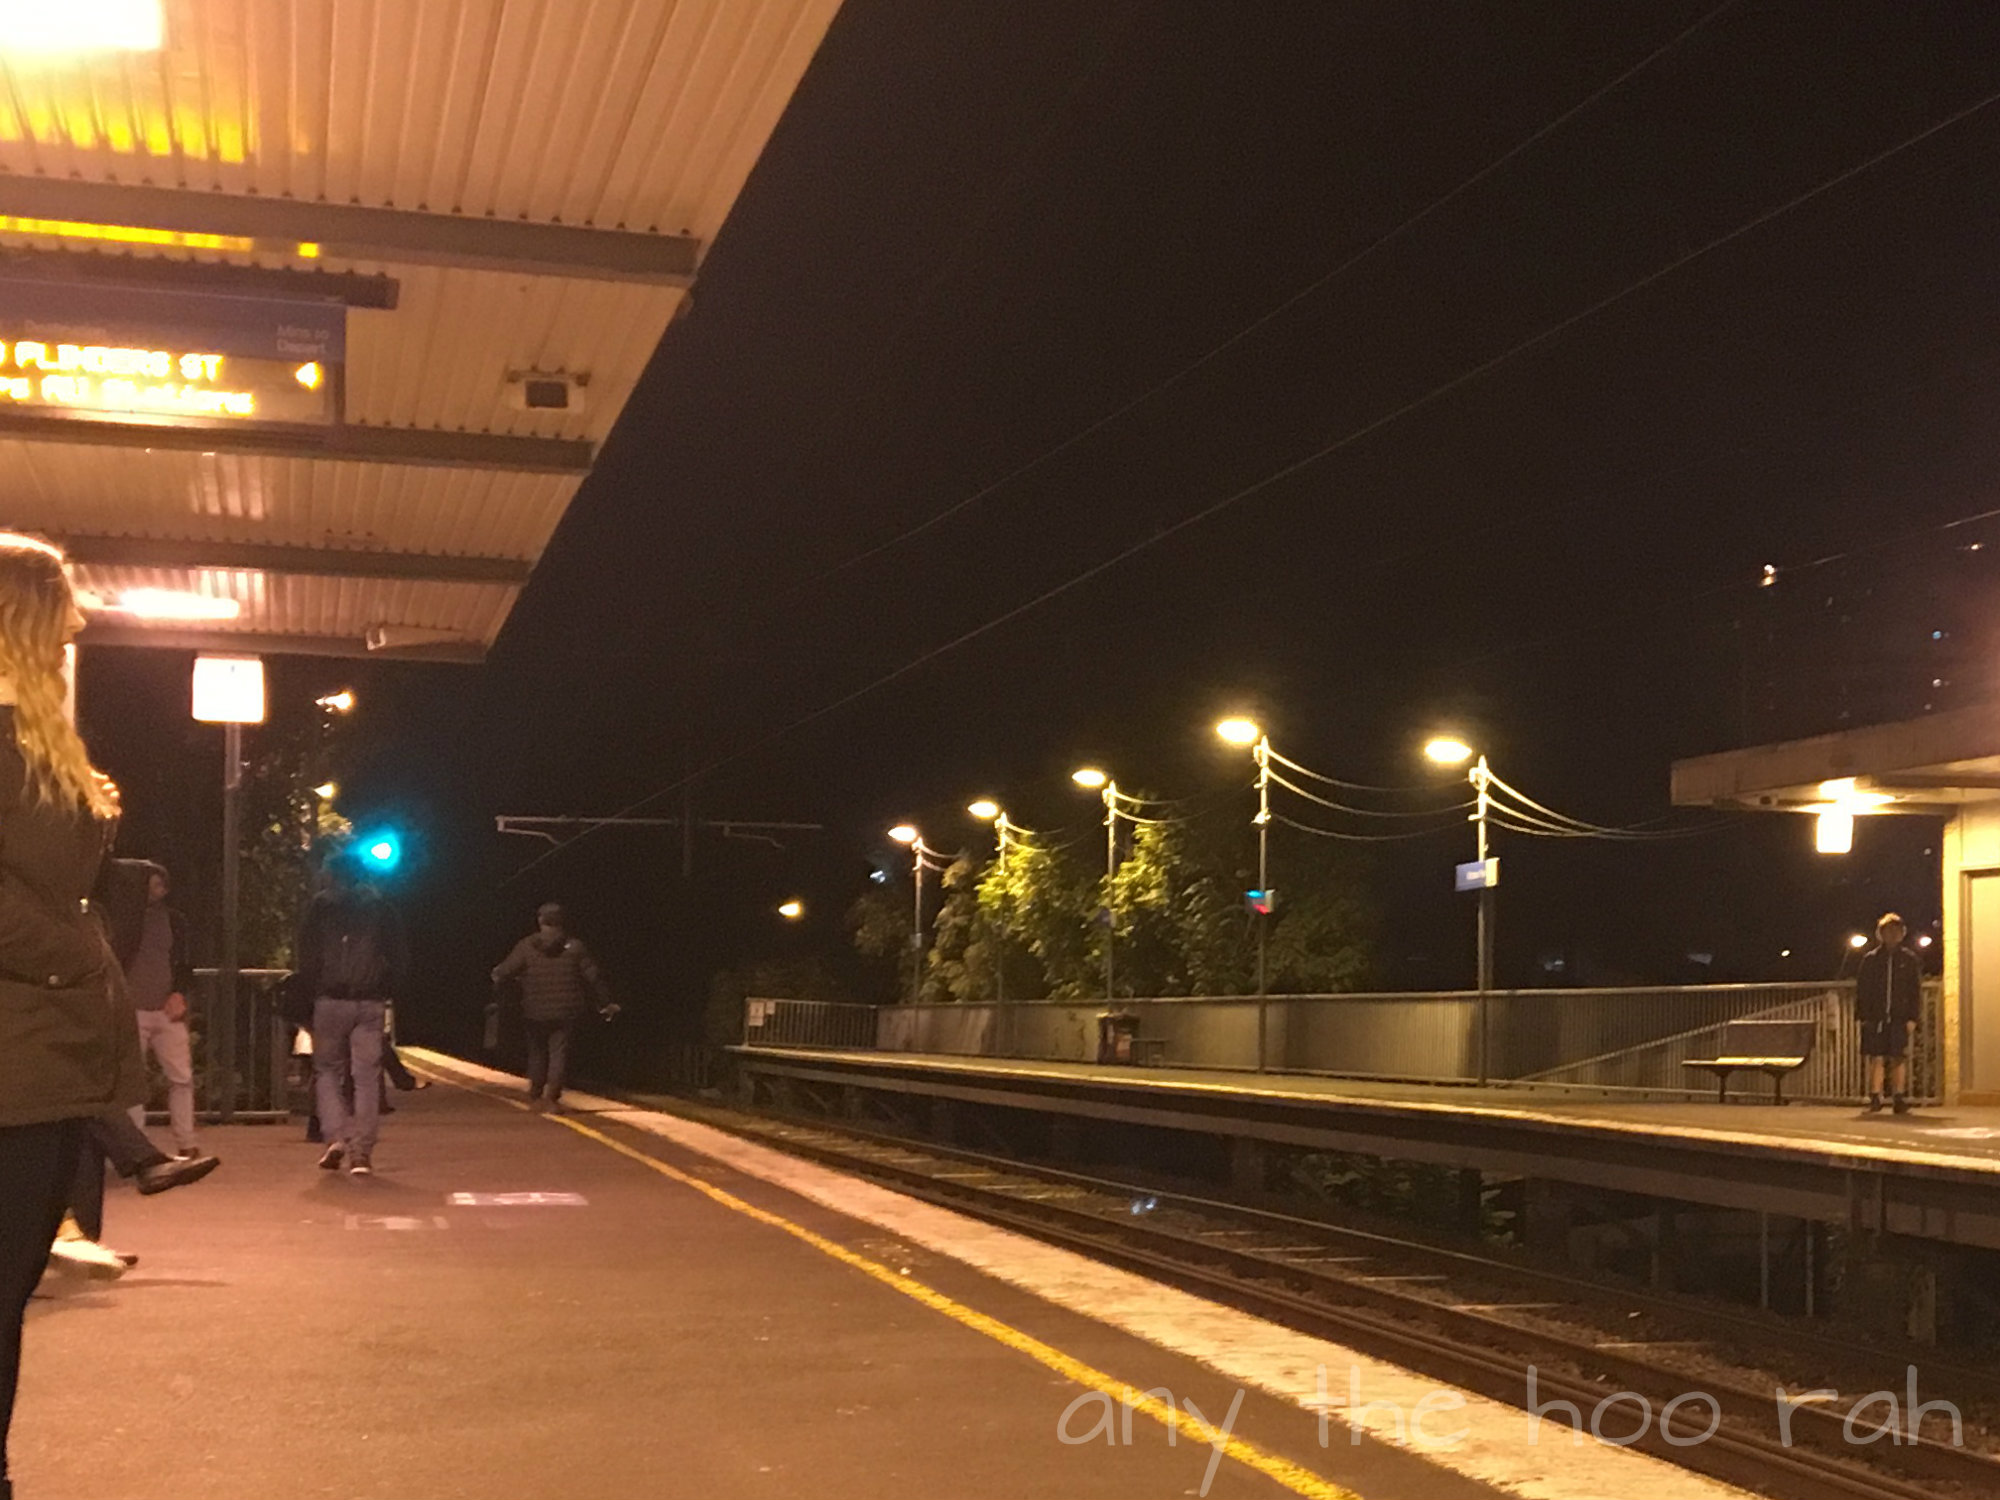 lovely autumn evening at the train station waiting for a train